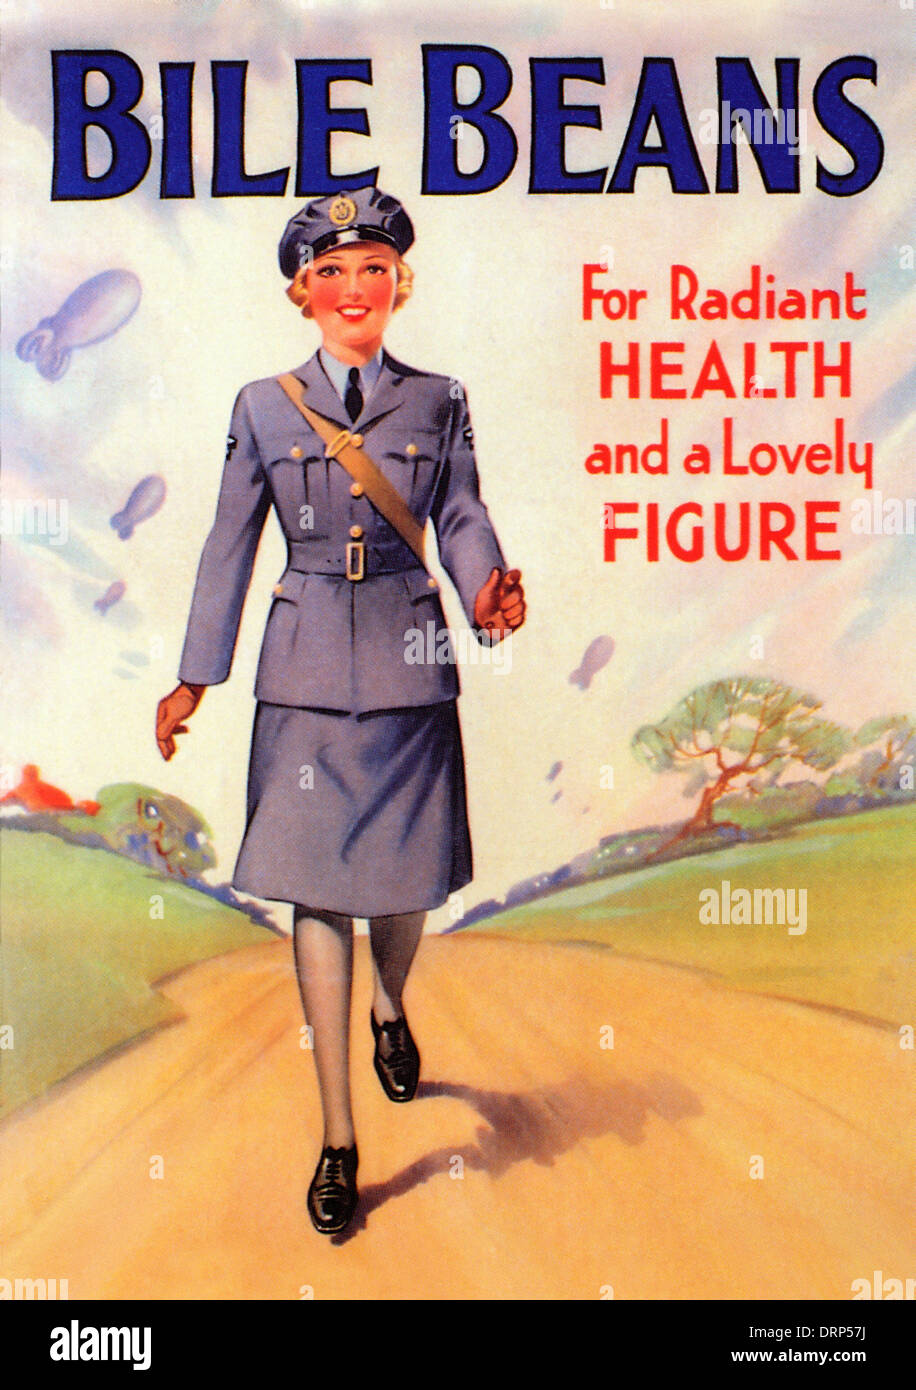 Bile Beans for health WWII WW2 World War 2 Women's Auxiliary Air Force woman in uniform poster postcard UK Great Britain United Kingdom KATHY DEWITT Stock Photo